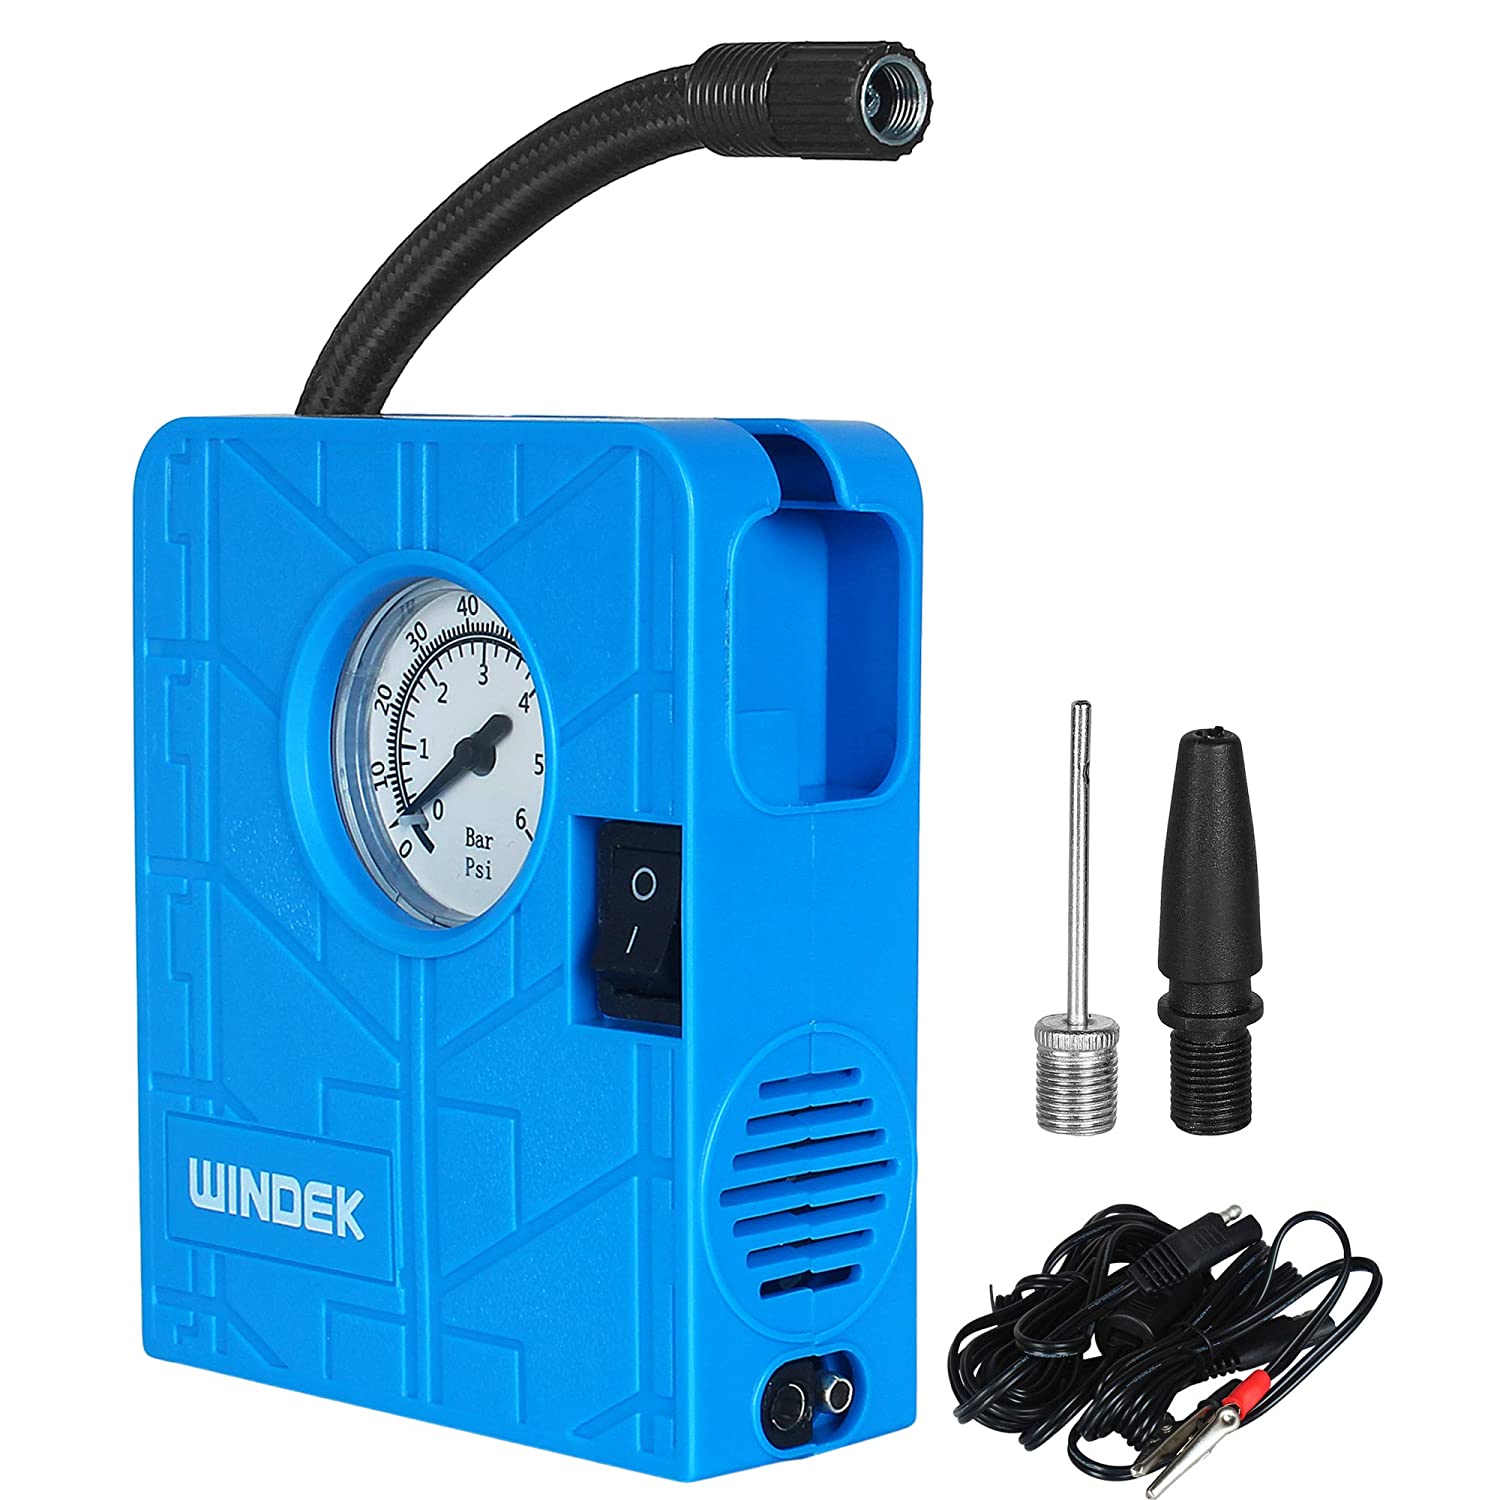 Windek 1500 -12V Portable Mini Air Pump Compressor Tyre Tire Inflator for Car, Bike, Bicycle, Motorcycles, Balls, with LED Light